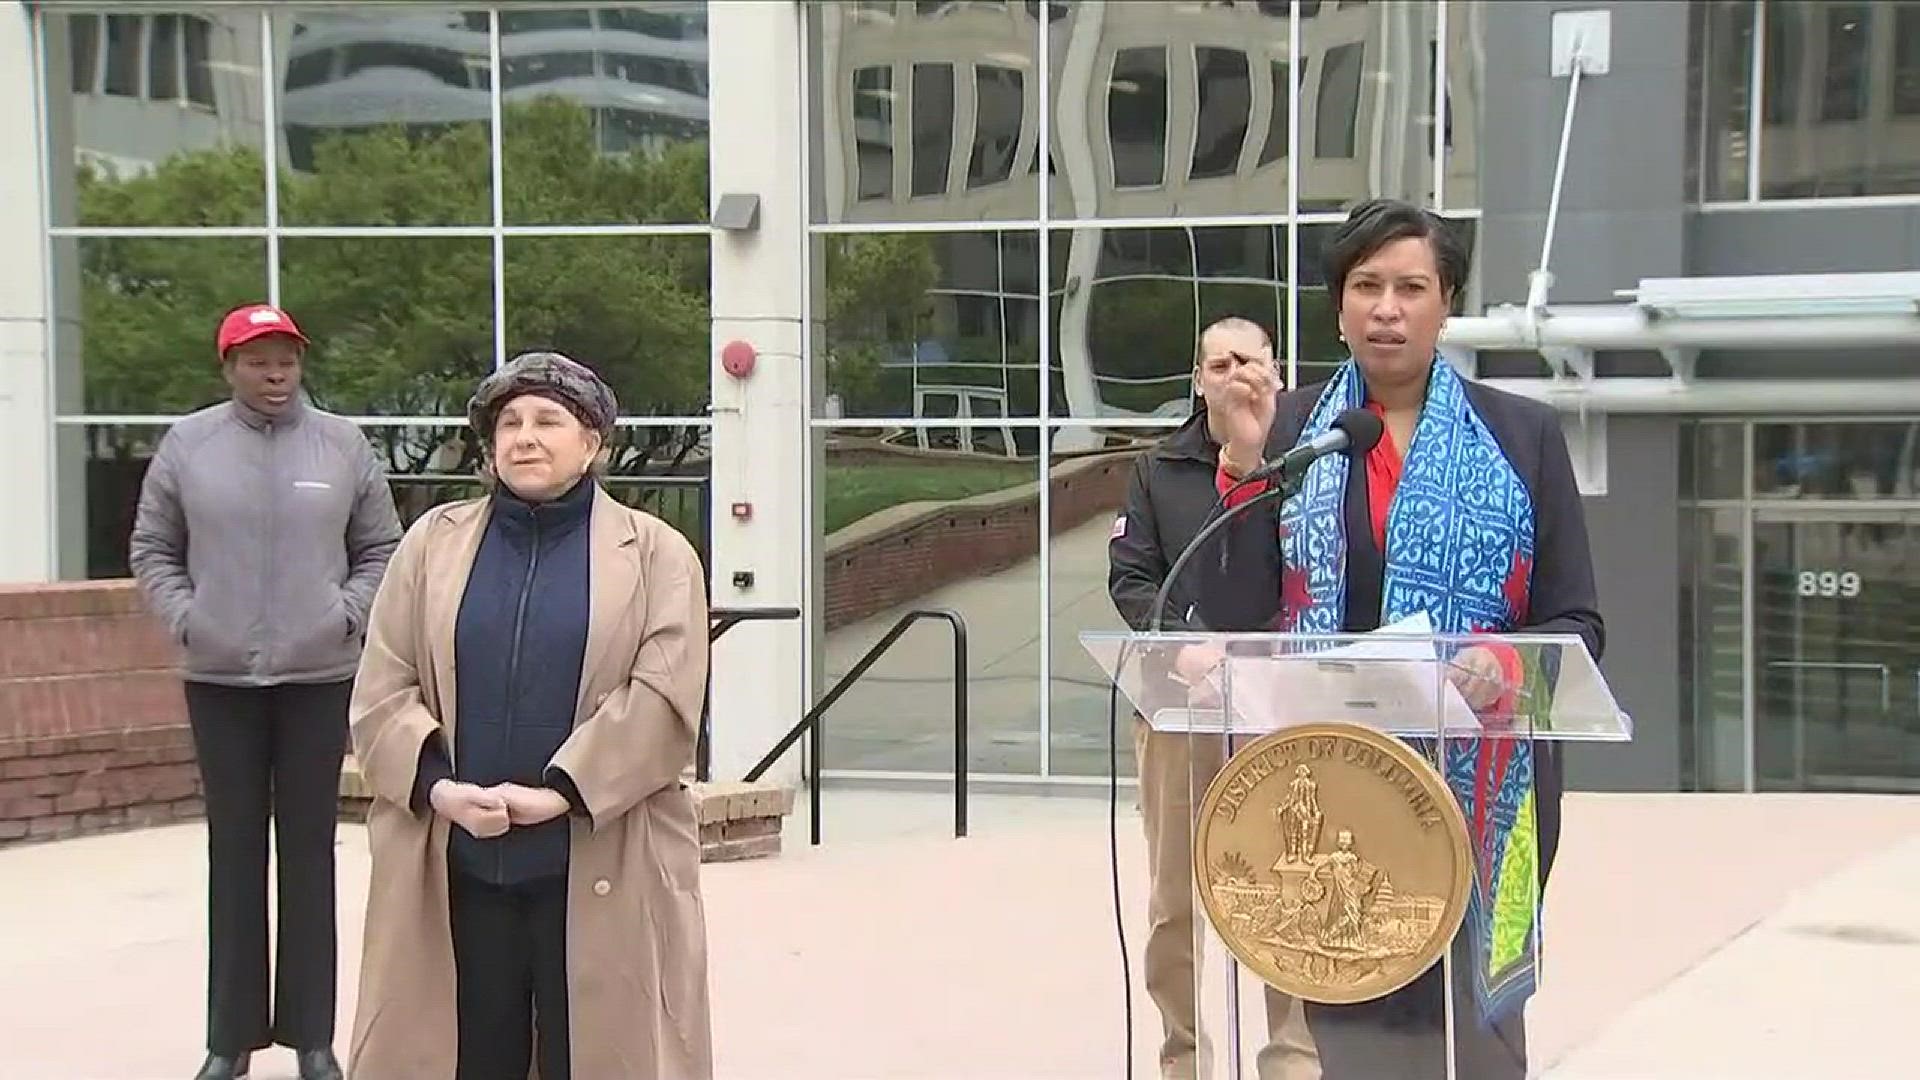 Mayor Bowser also closes non-essential businesses.